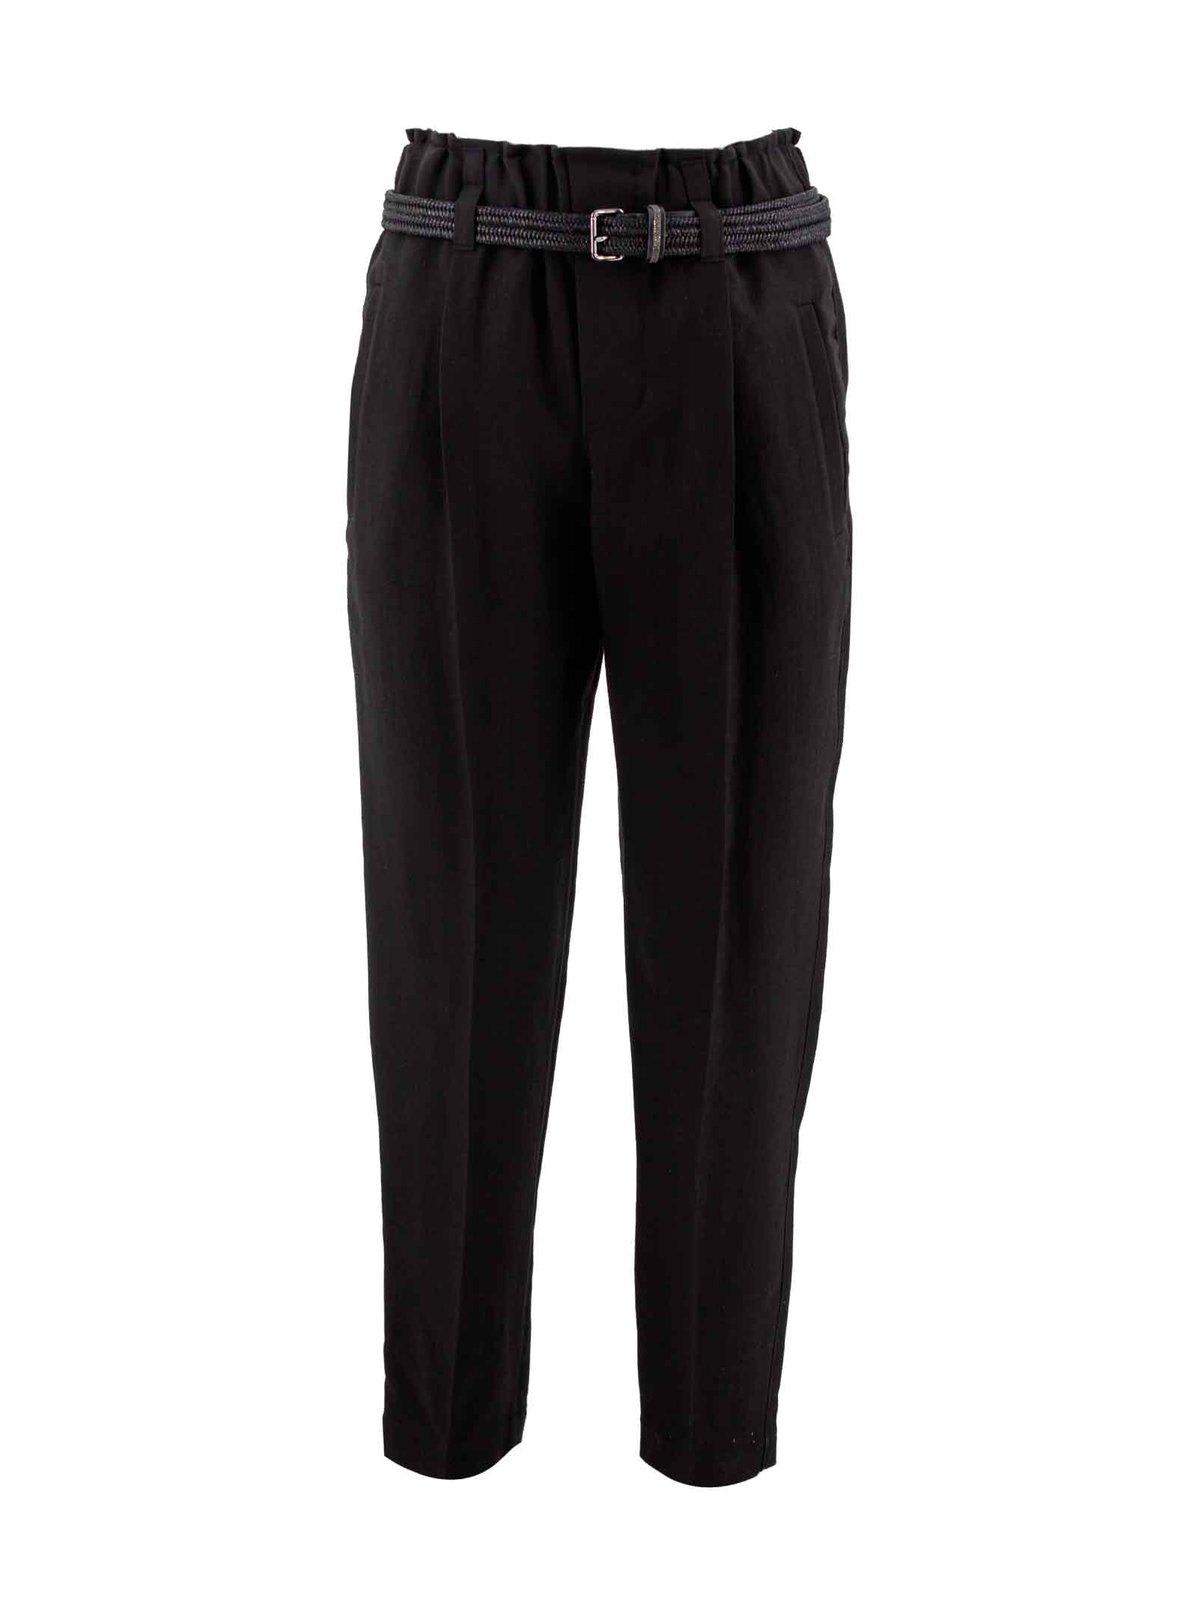 Brunello Cucinelli Belted Waist Tapered Pants